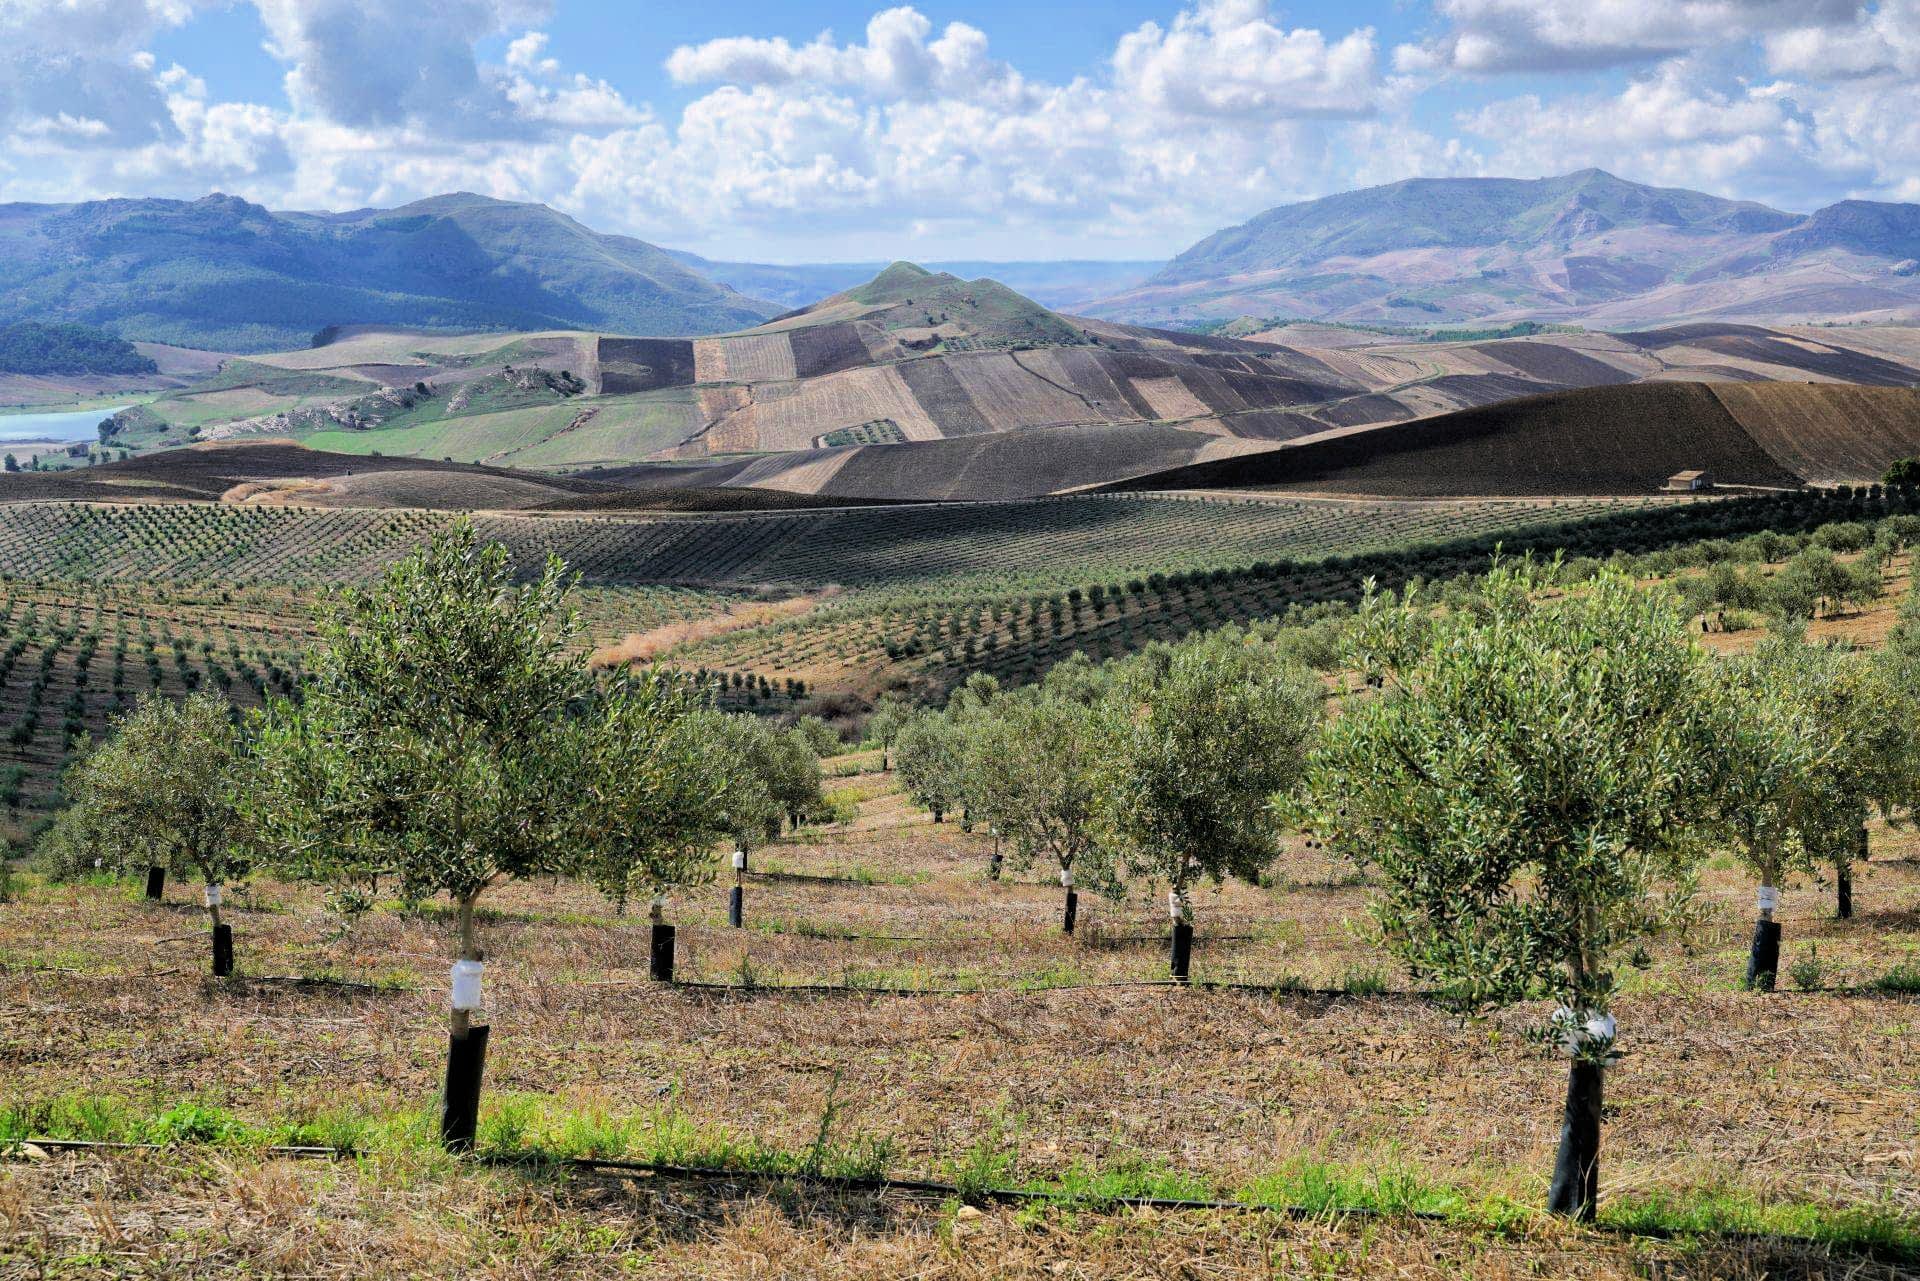 profiles-the-best-olive-oils-production-europe-investing-in-community-and-the-environment-through-olive-farming-olive-oil-times